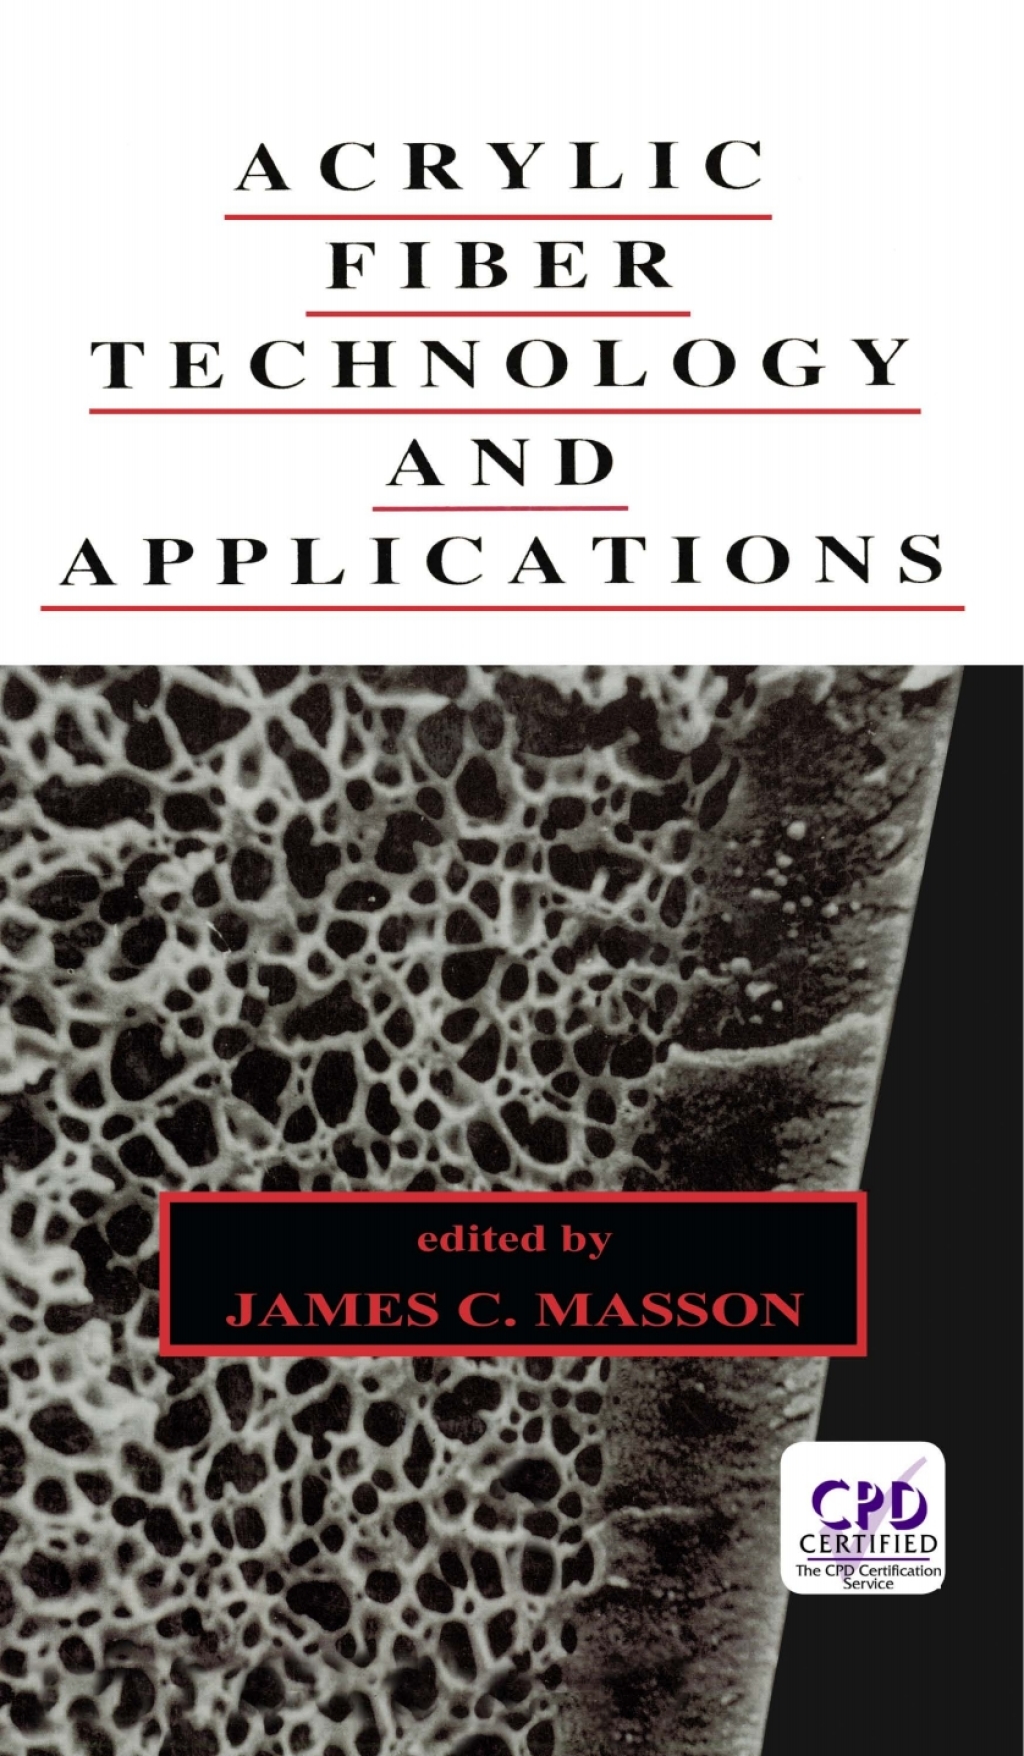 ISBN 9780824789770 product image for Acrylic Fiber Technology and Applications - 1st Edition (eBook Rental) | upcitemdb.com